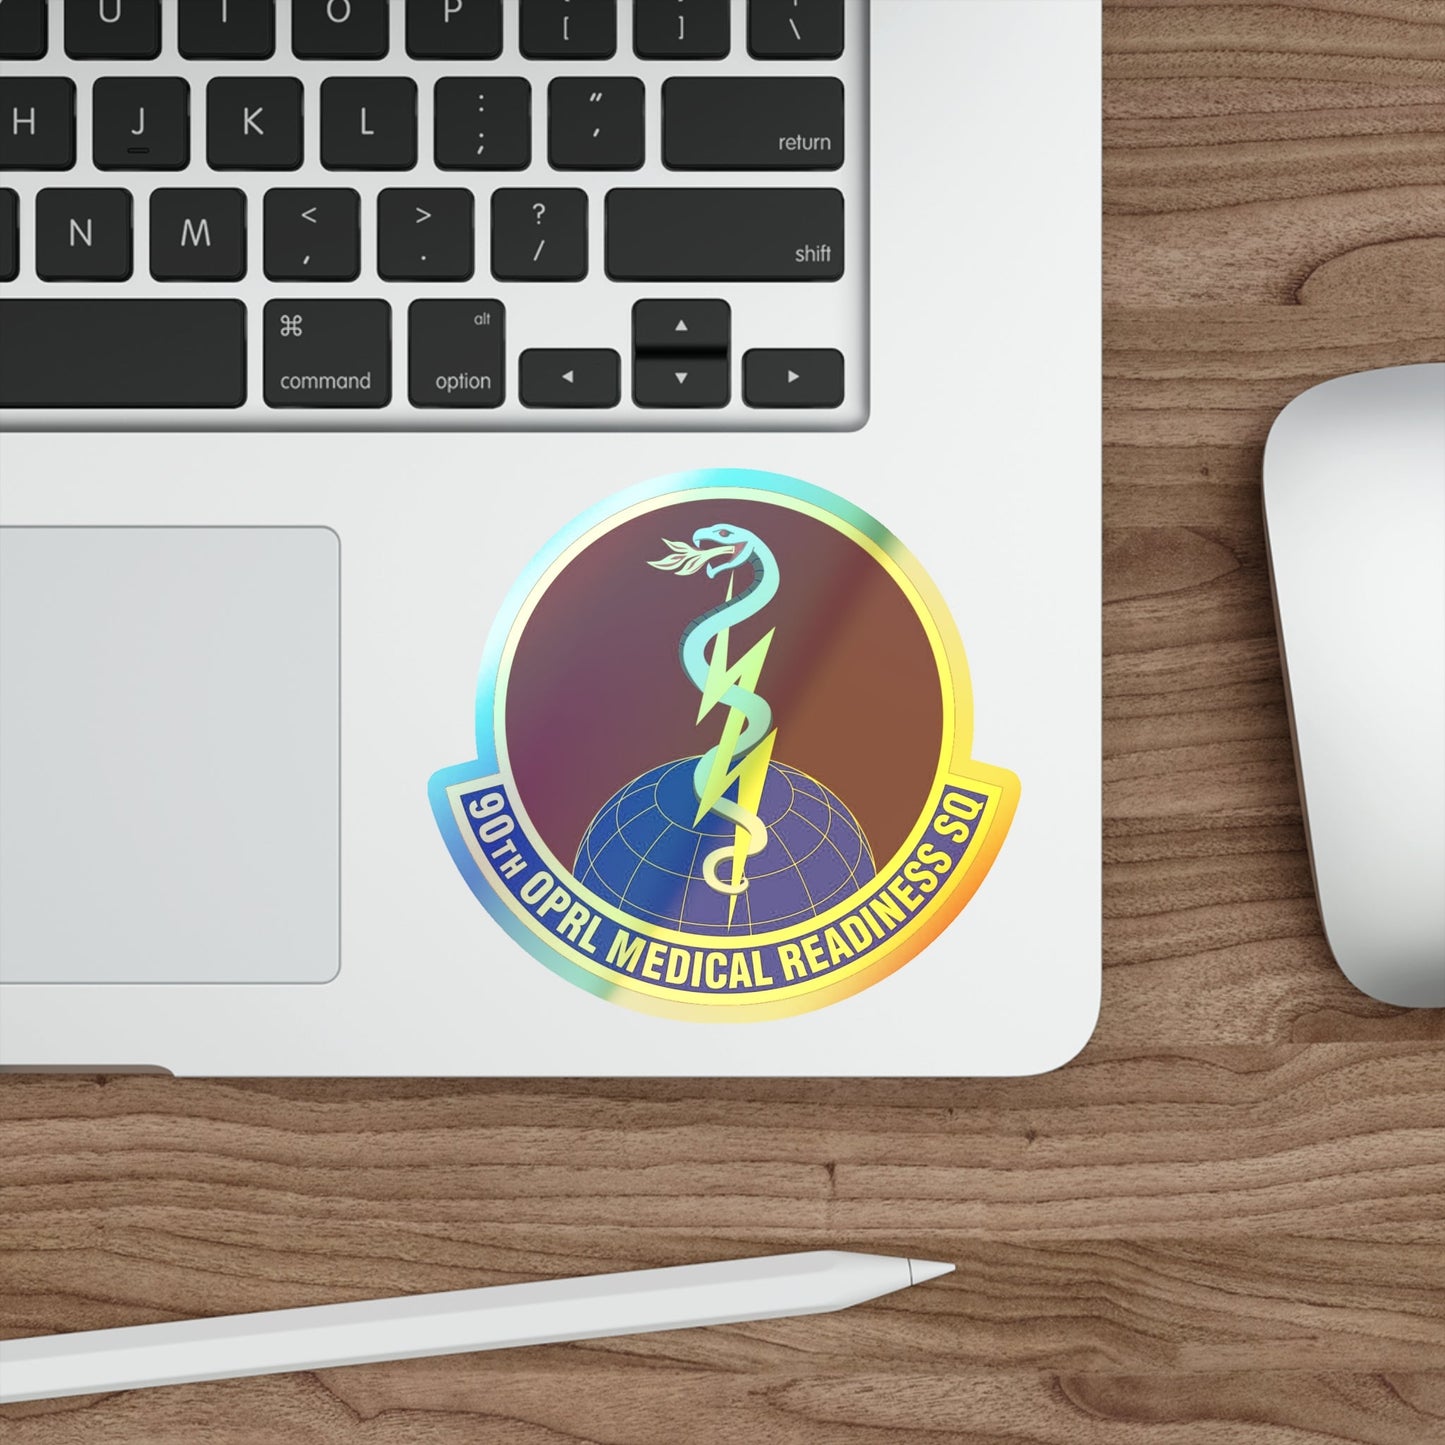 90 Operational Medical Readiness Squadron AFGSC (U.S. Air Force) Holographic STICKER Die-Cut Vinyl Decal-The Sticker Space